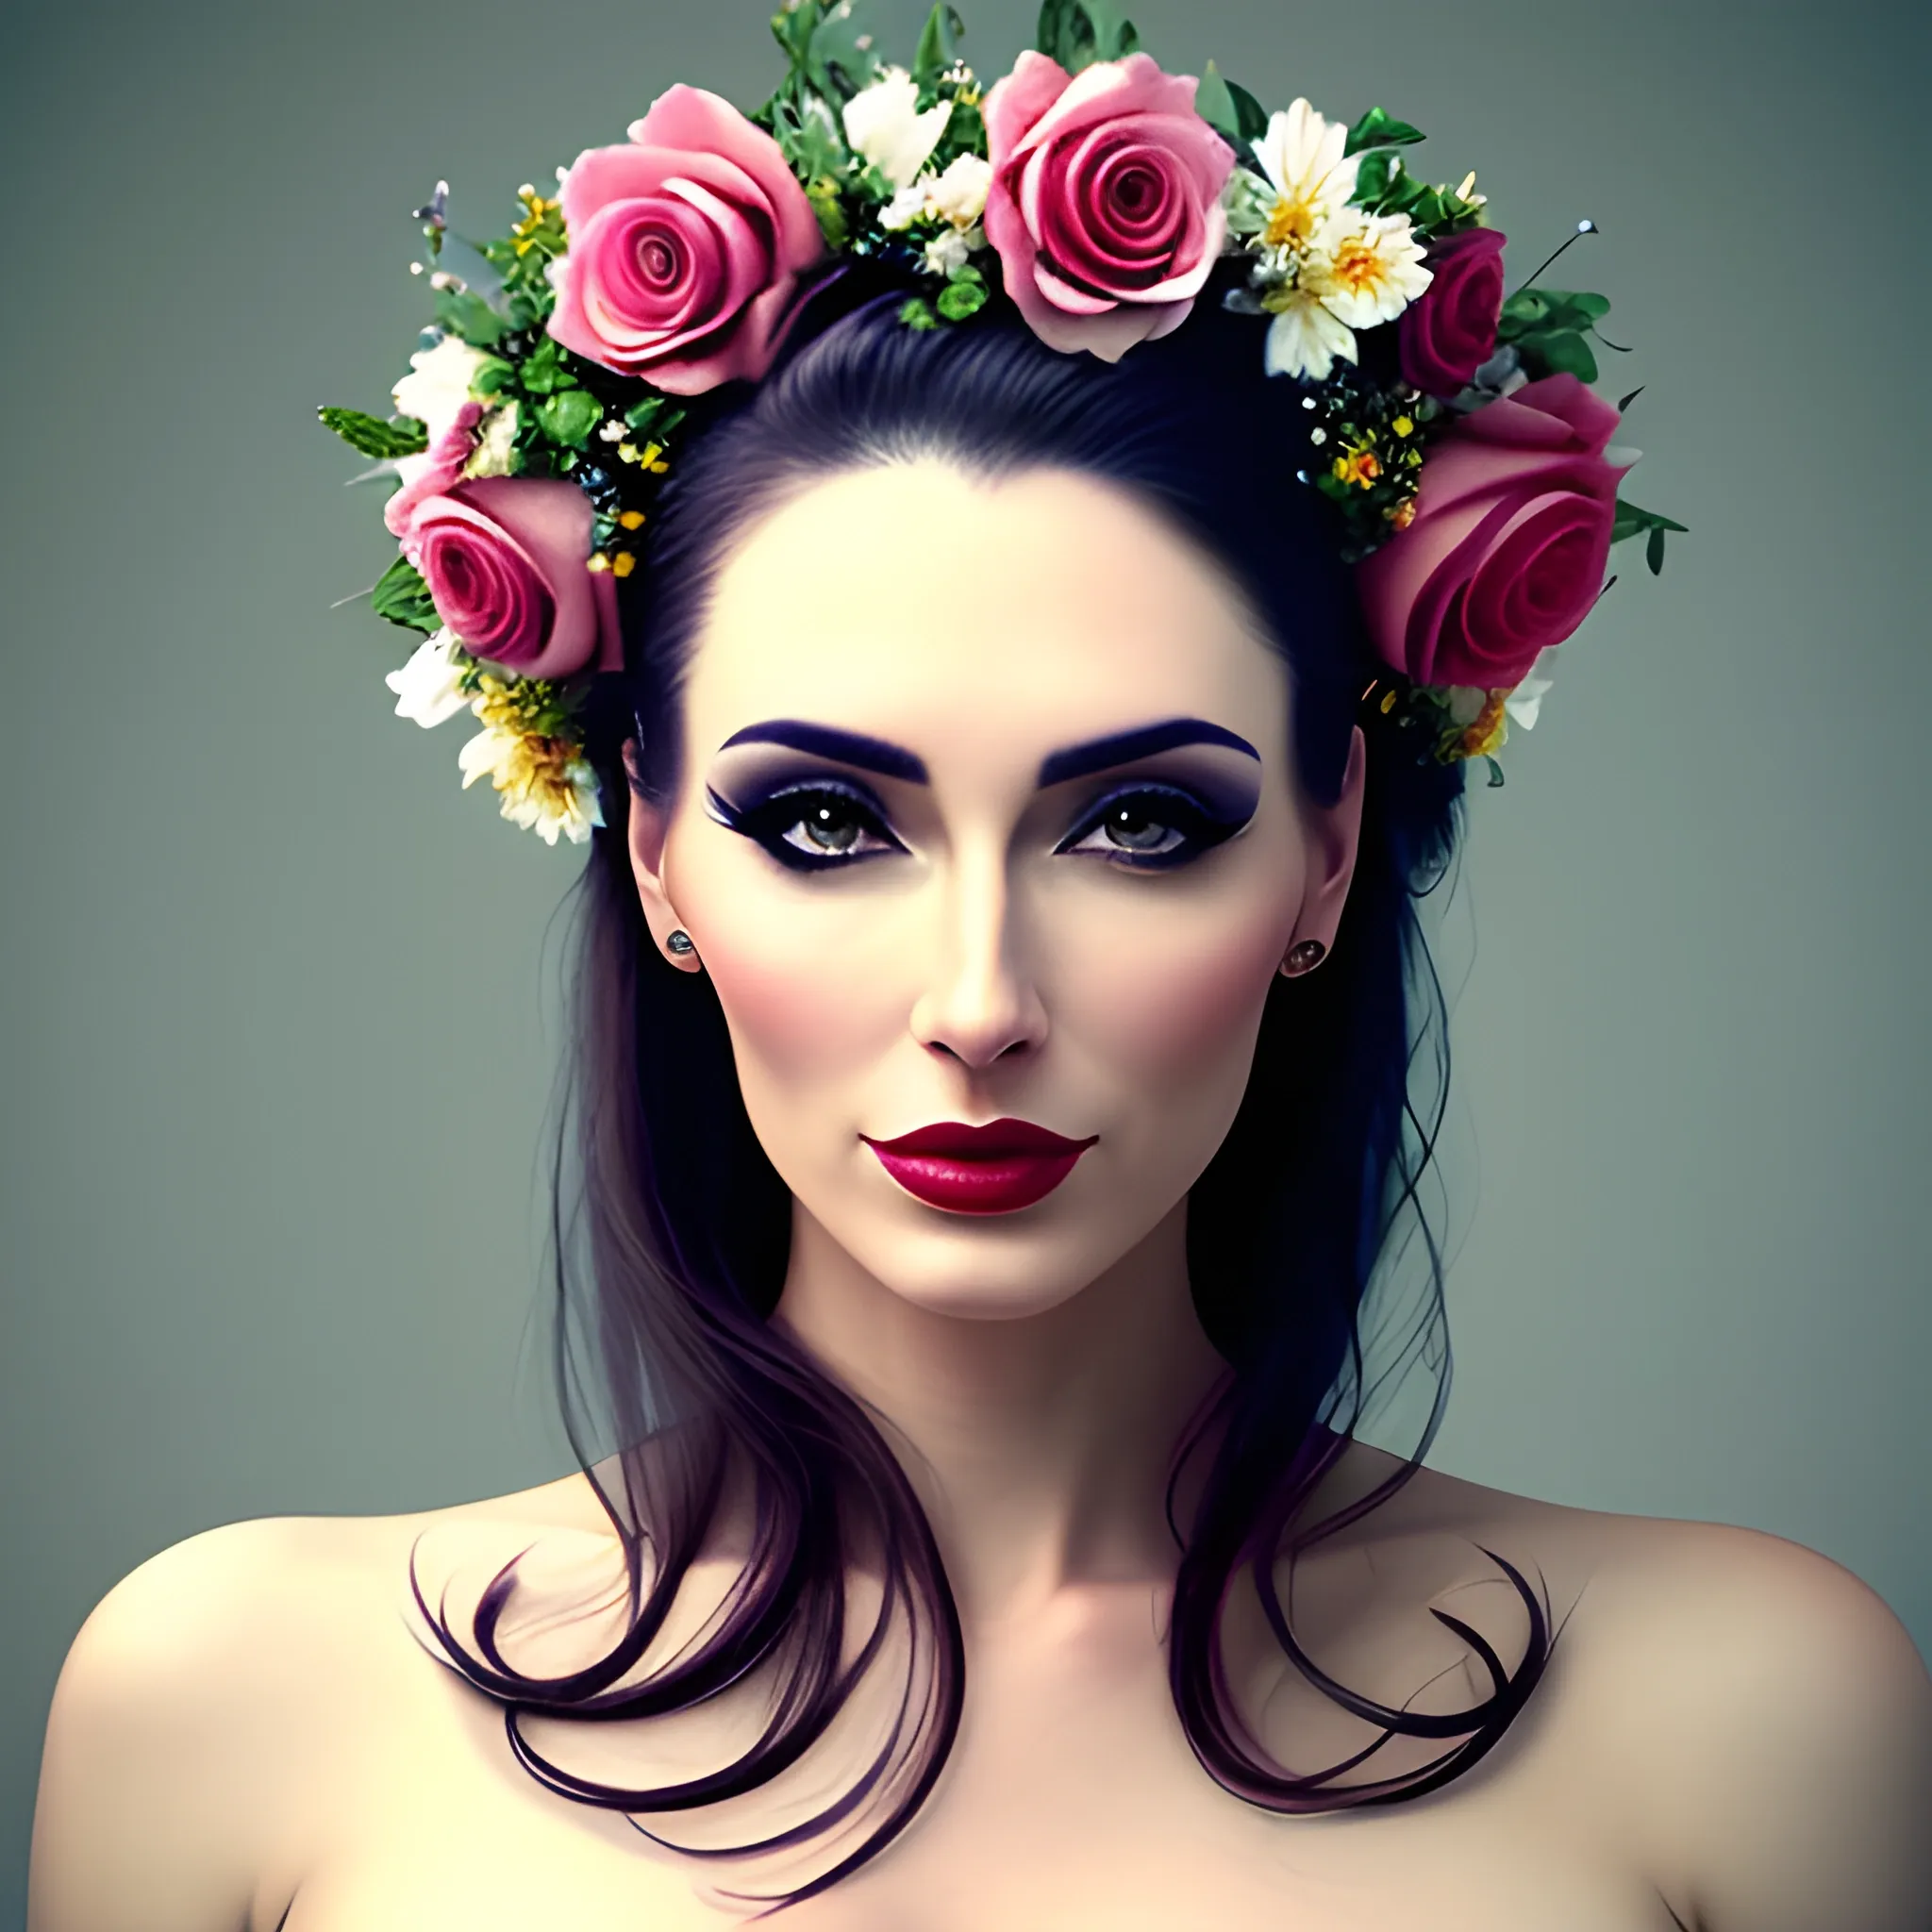 Girl with flowers on her head, beautiful and beautiful, art photo real life full body